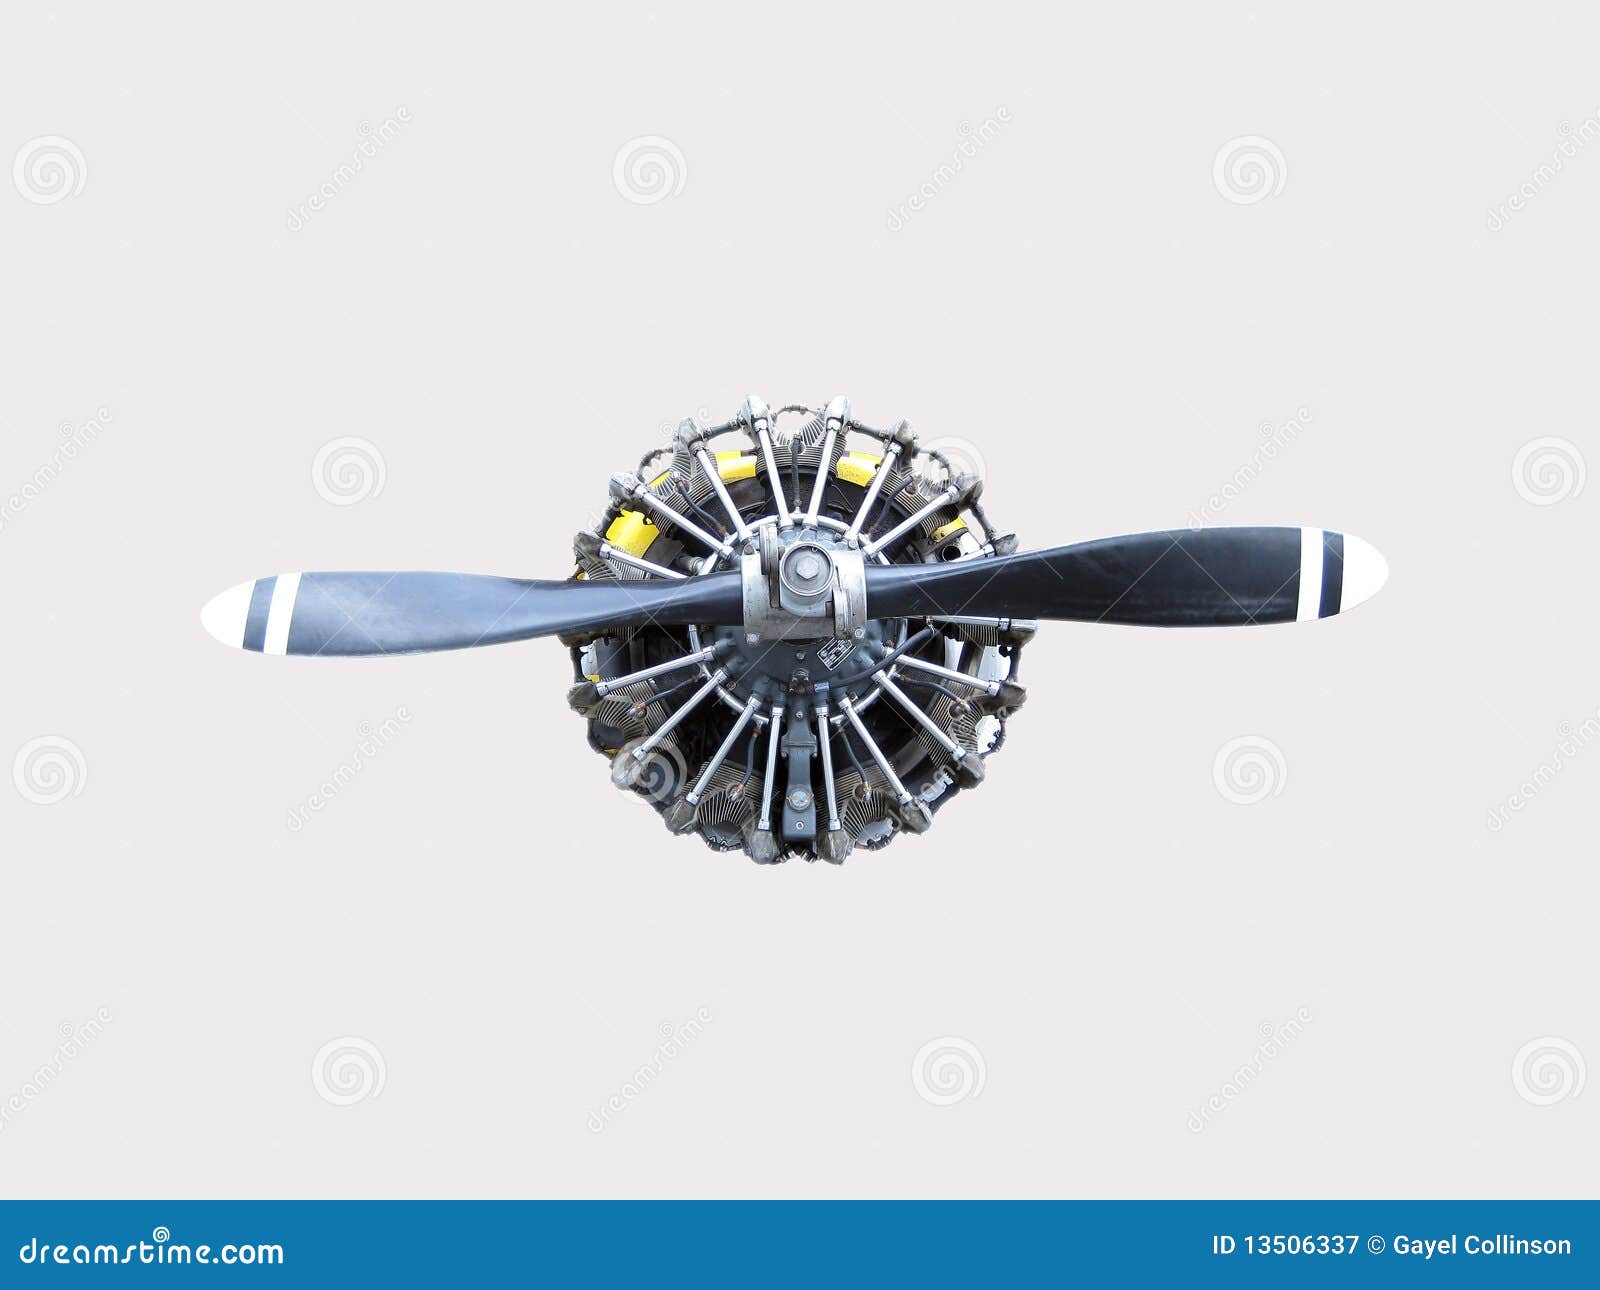 aircraft engine and propeller